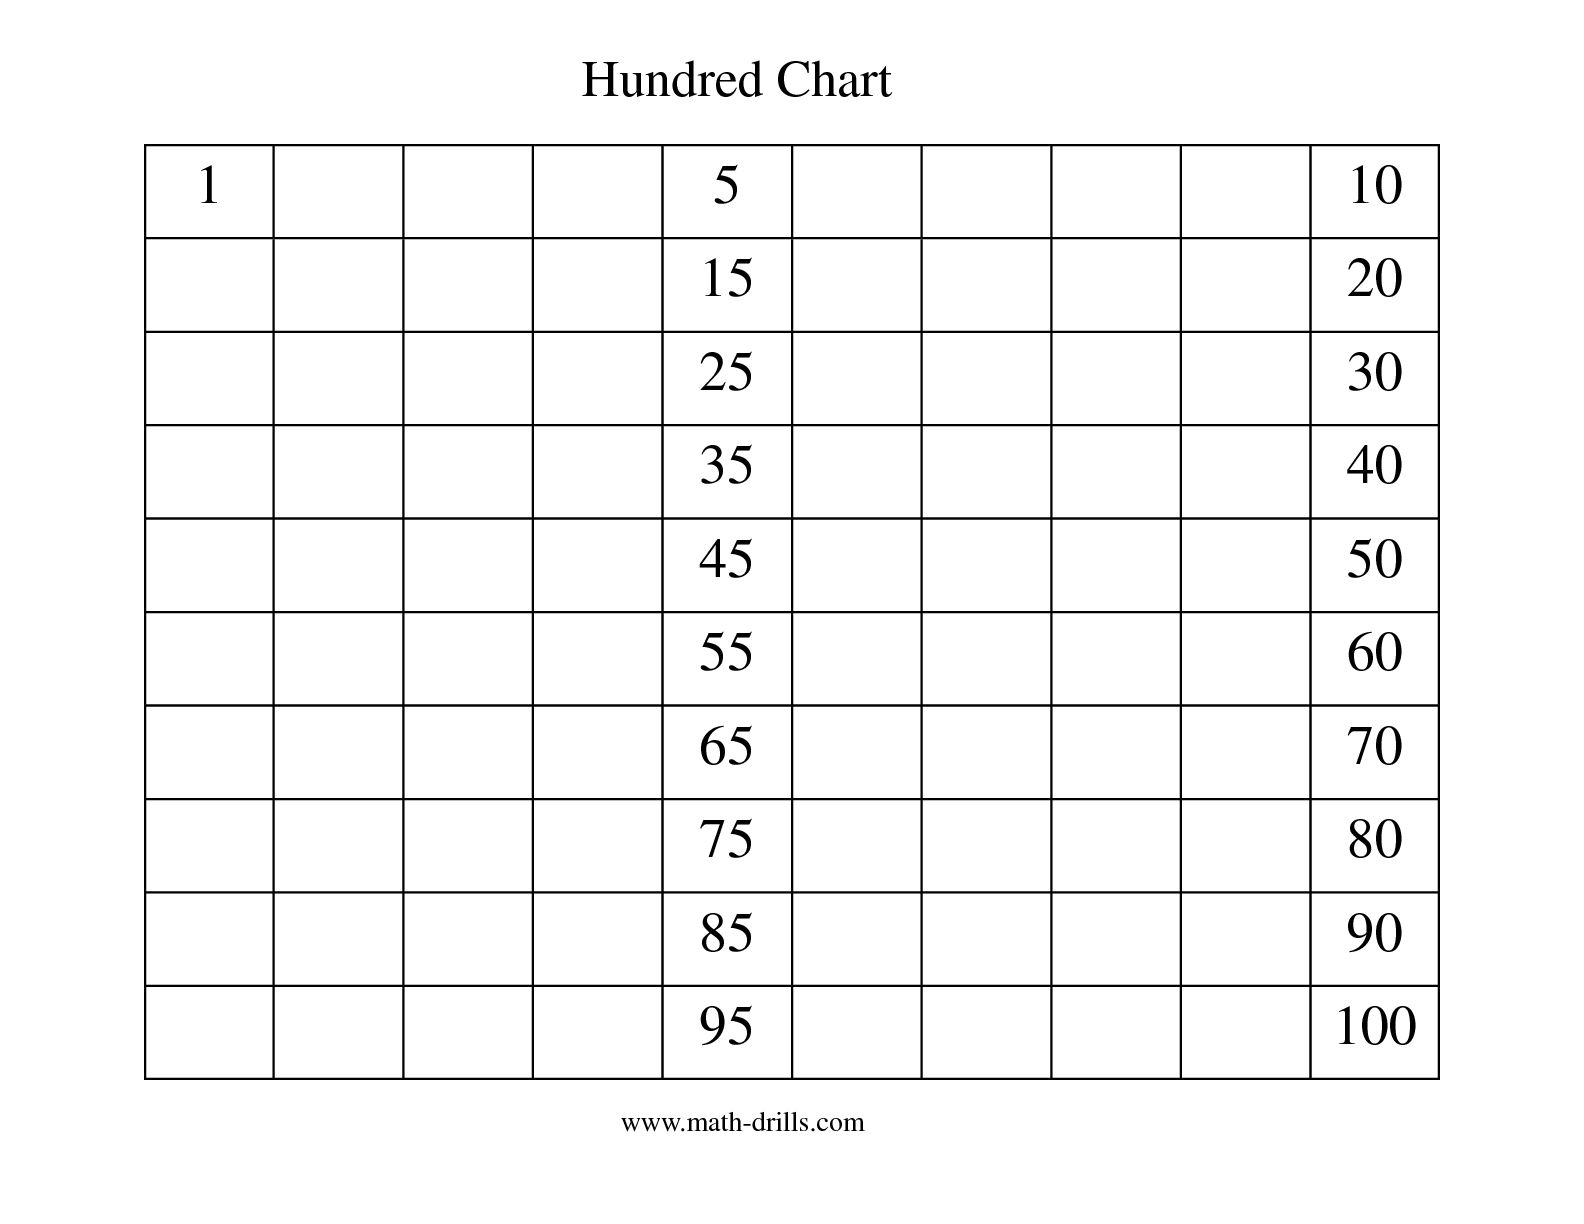 13-best-images-of-100-chart-fill-in-worksheet-blank-printable-hundreds-charts-worksheets